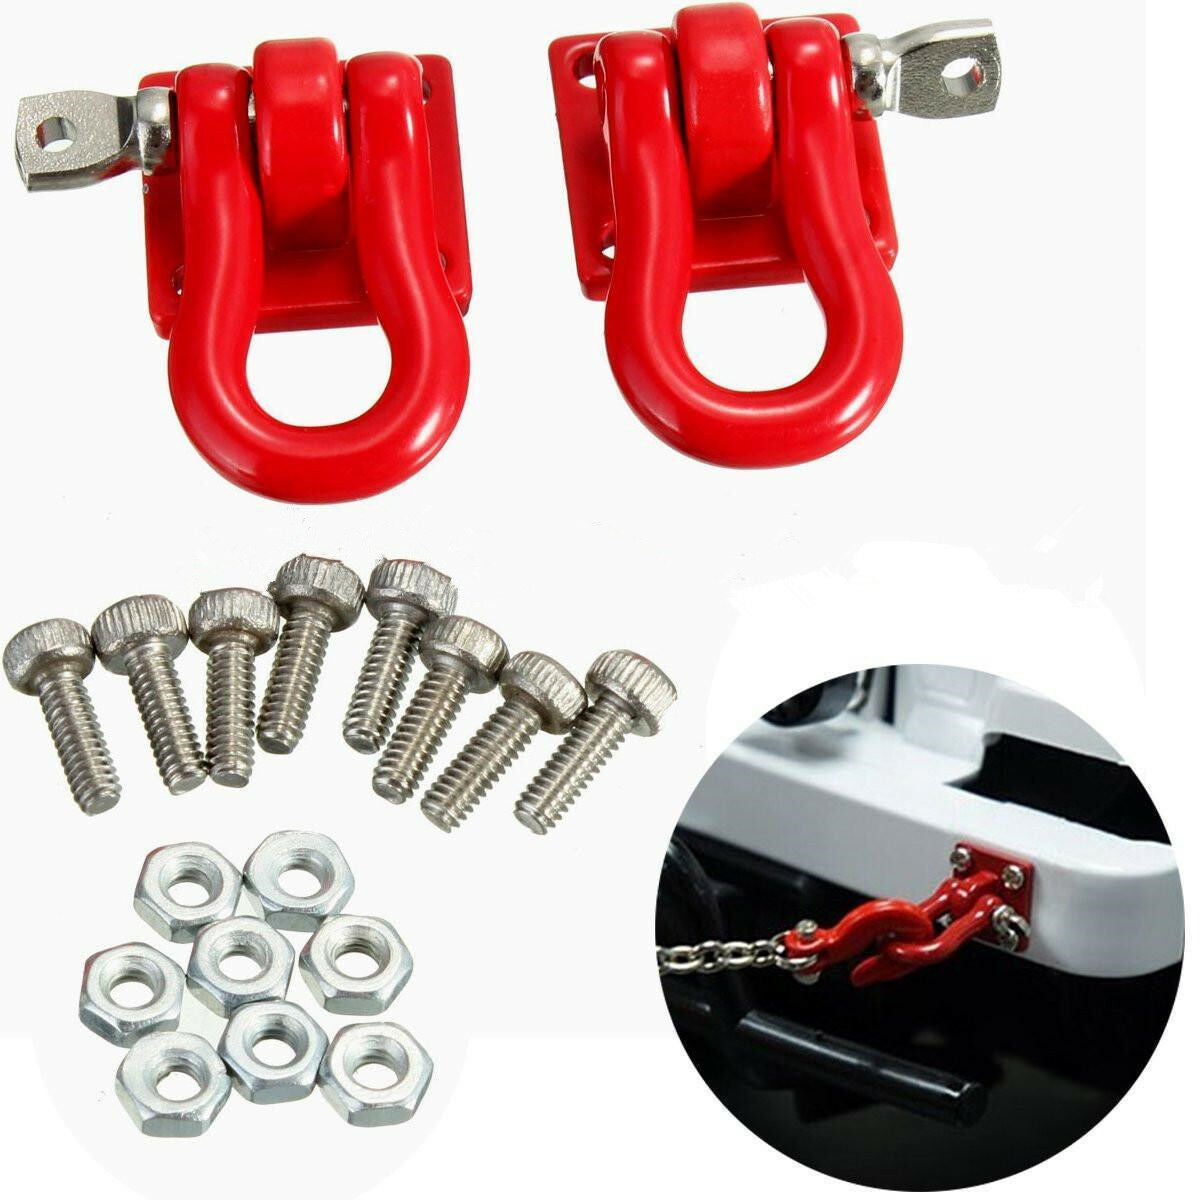 1 Pair 1:10 Scale Hook Shackles for RC SCX-10 Crawler Truck Accessories Red T DD